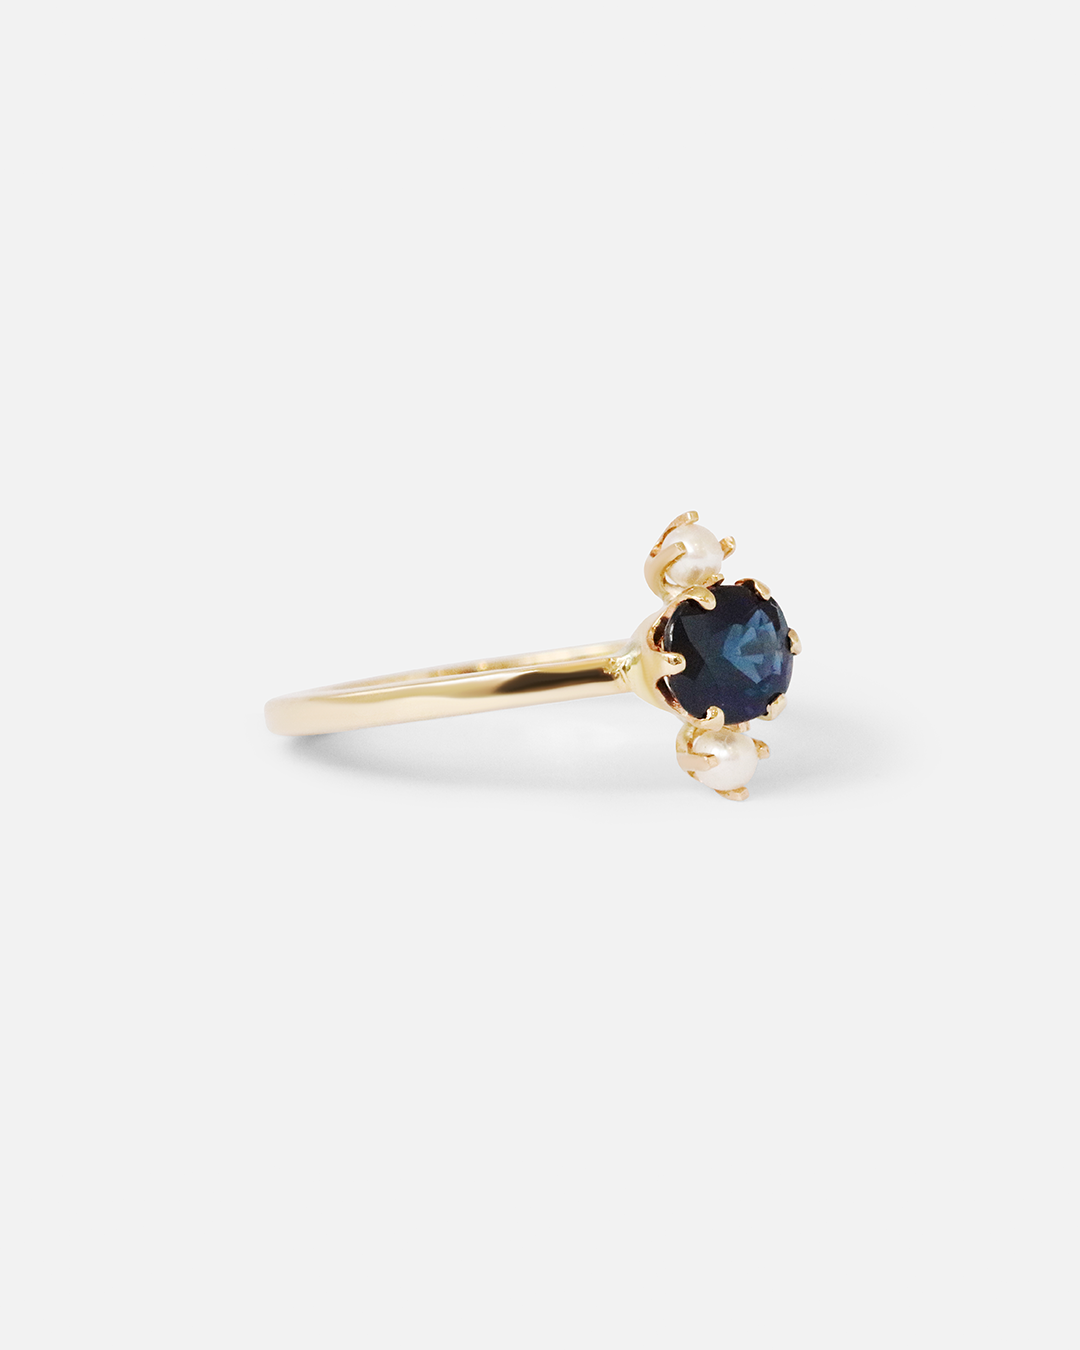 Sapphire + Pearls Ring By Nishi